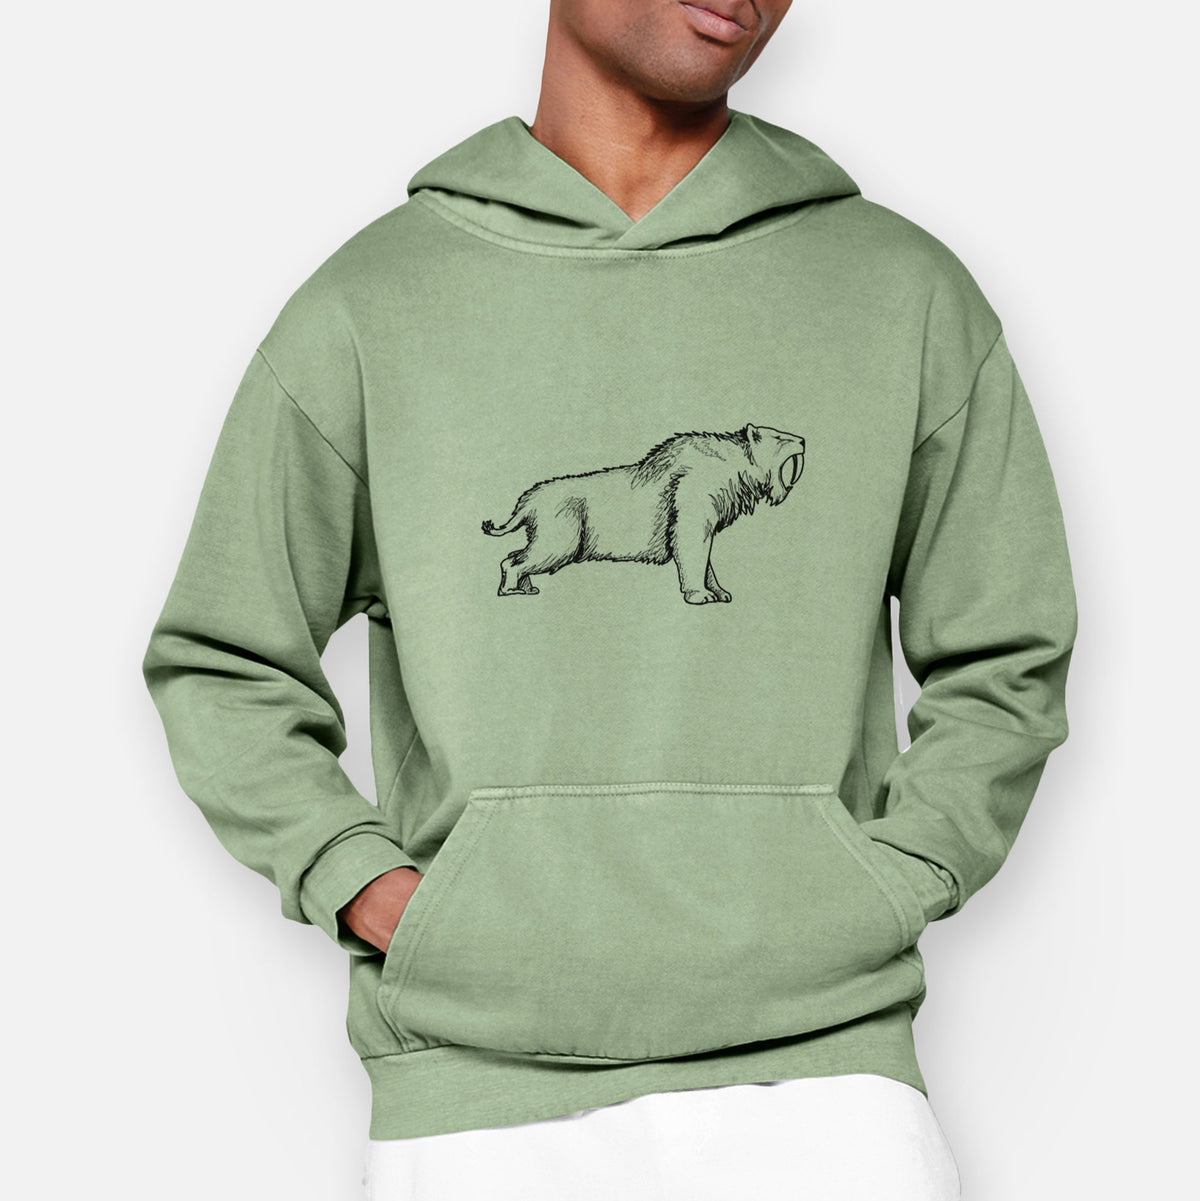 Saber-toothed Tiger - Smilodon  - Urban Heavyweight Hoodie